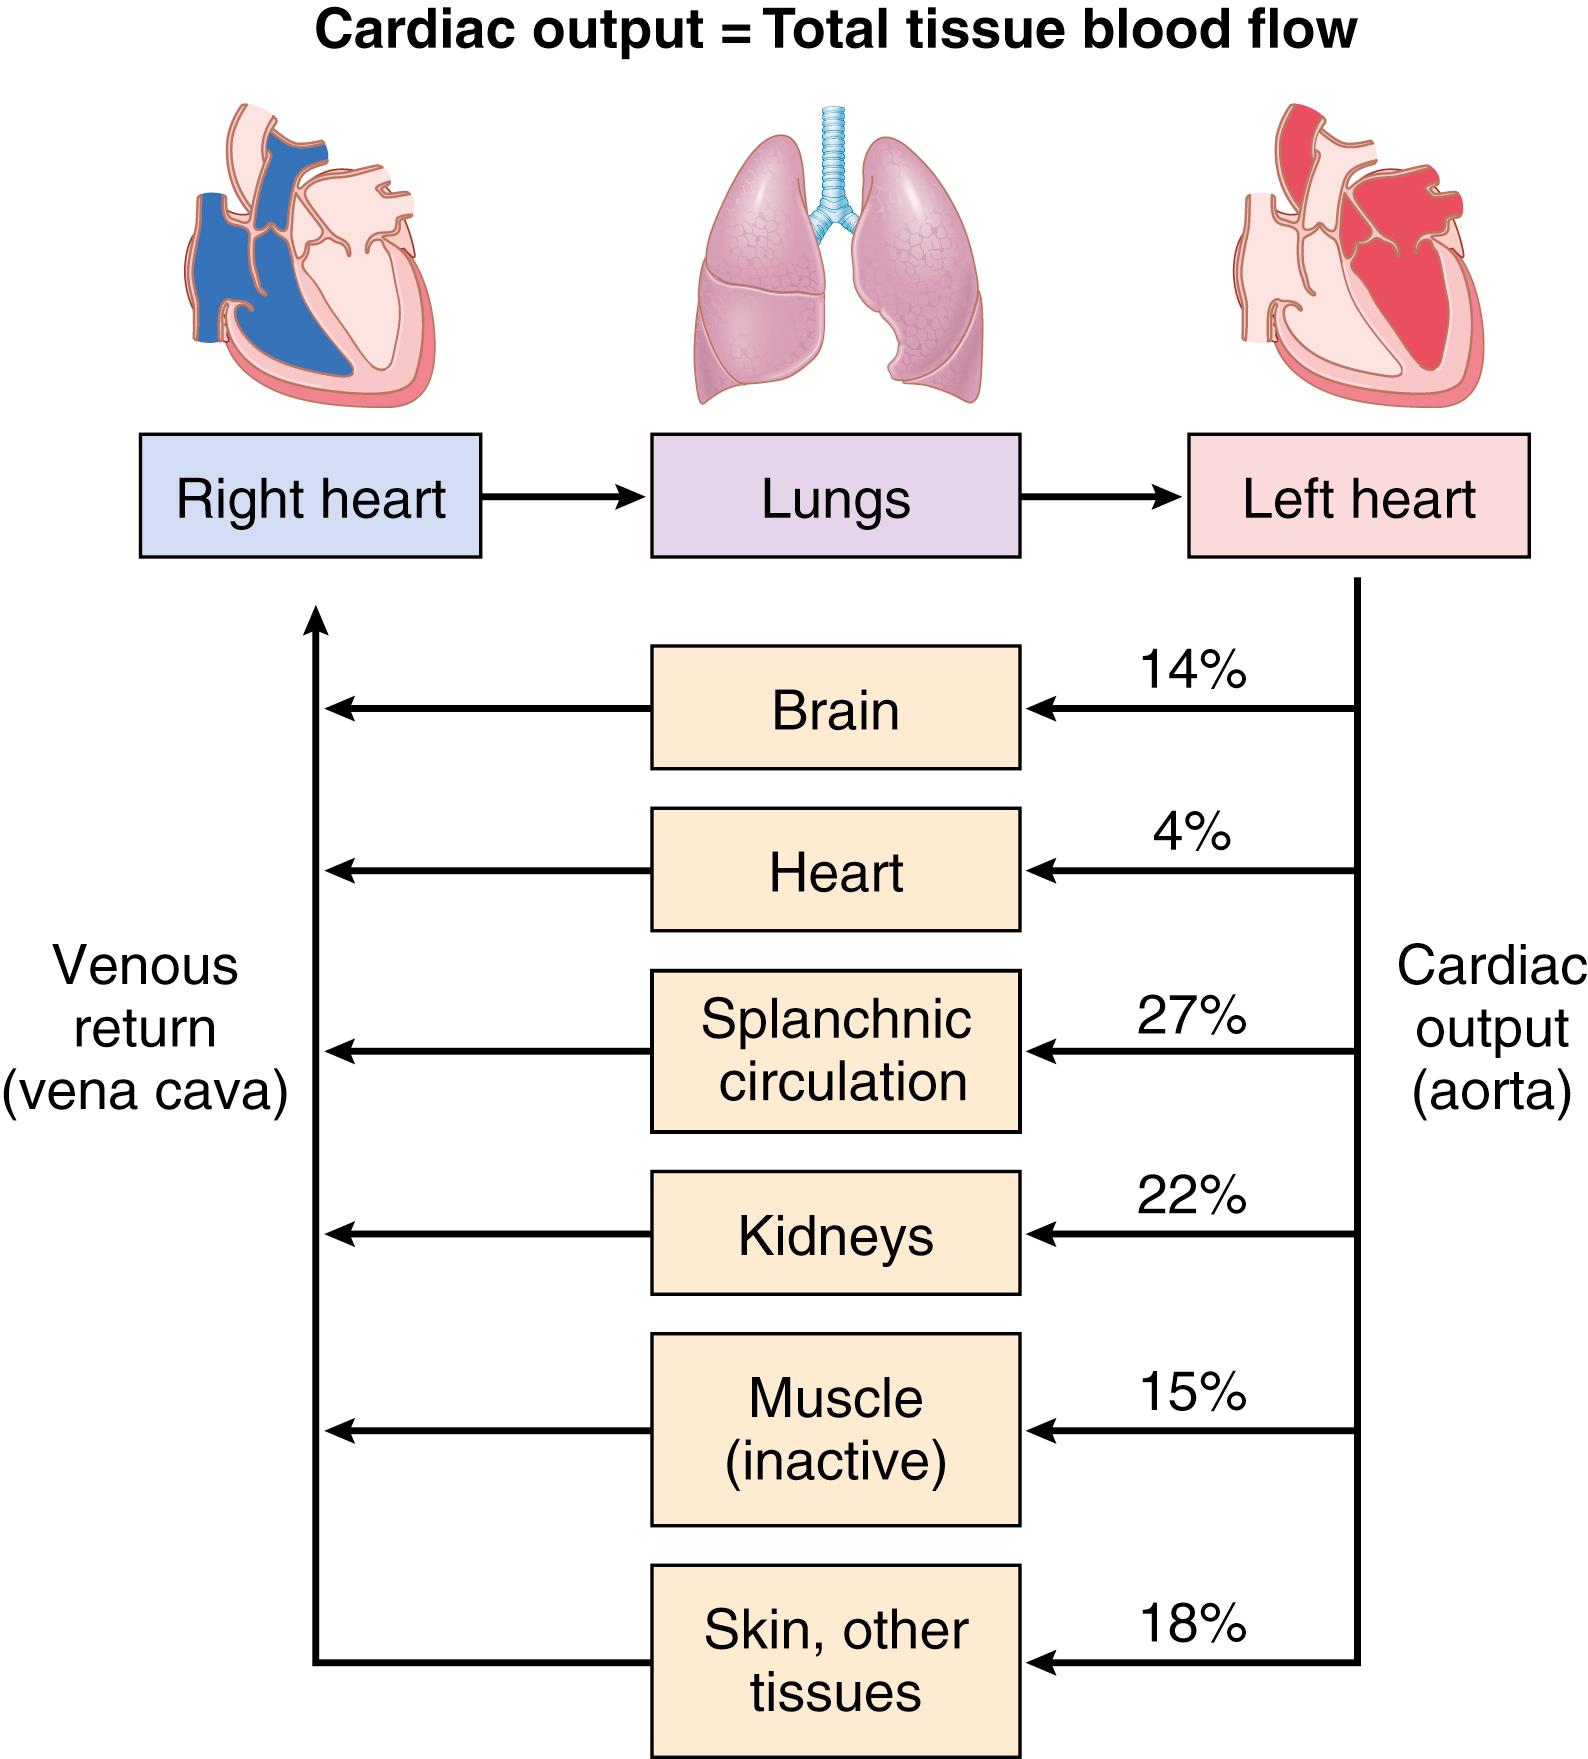 Figure 20-2., Cardiac output is equal to venous return and is the sum of tissue and organ blood flows. Except when the heart is severely weakened and unable to pump the venous return adequately, cardiac output (total tissue blood flow) is determined mainly by the metabolic needs of the tissues and organs of the body.